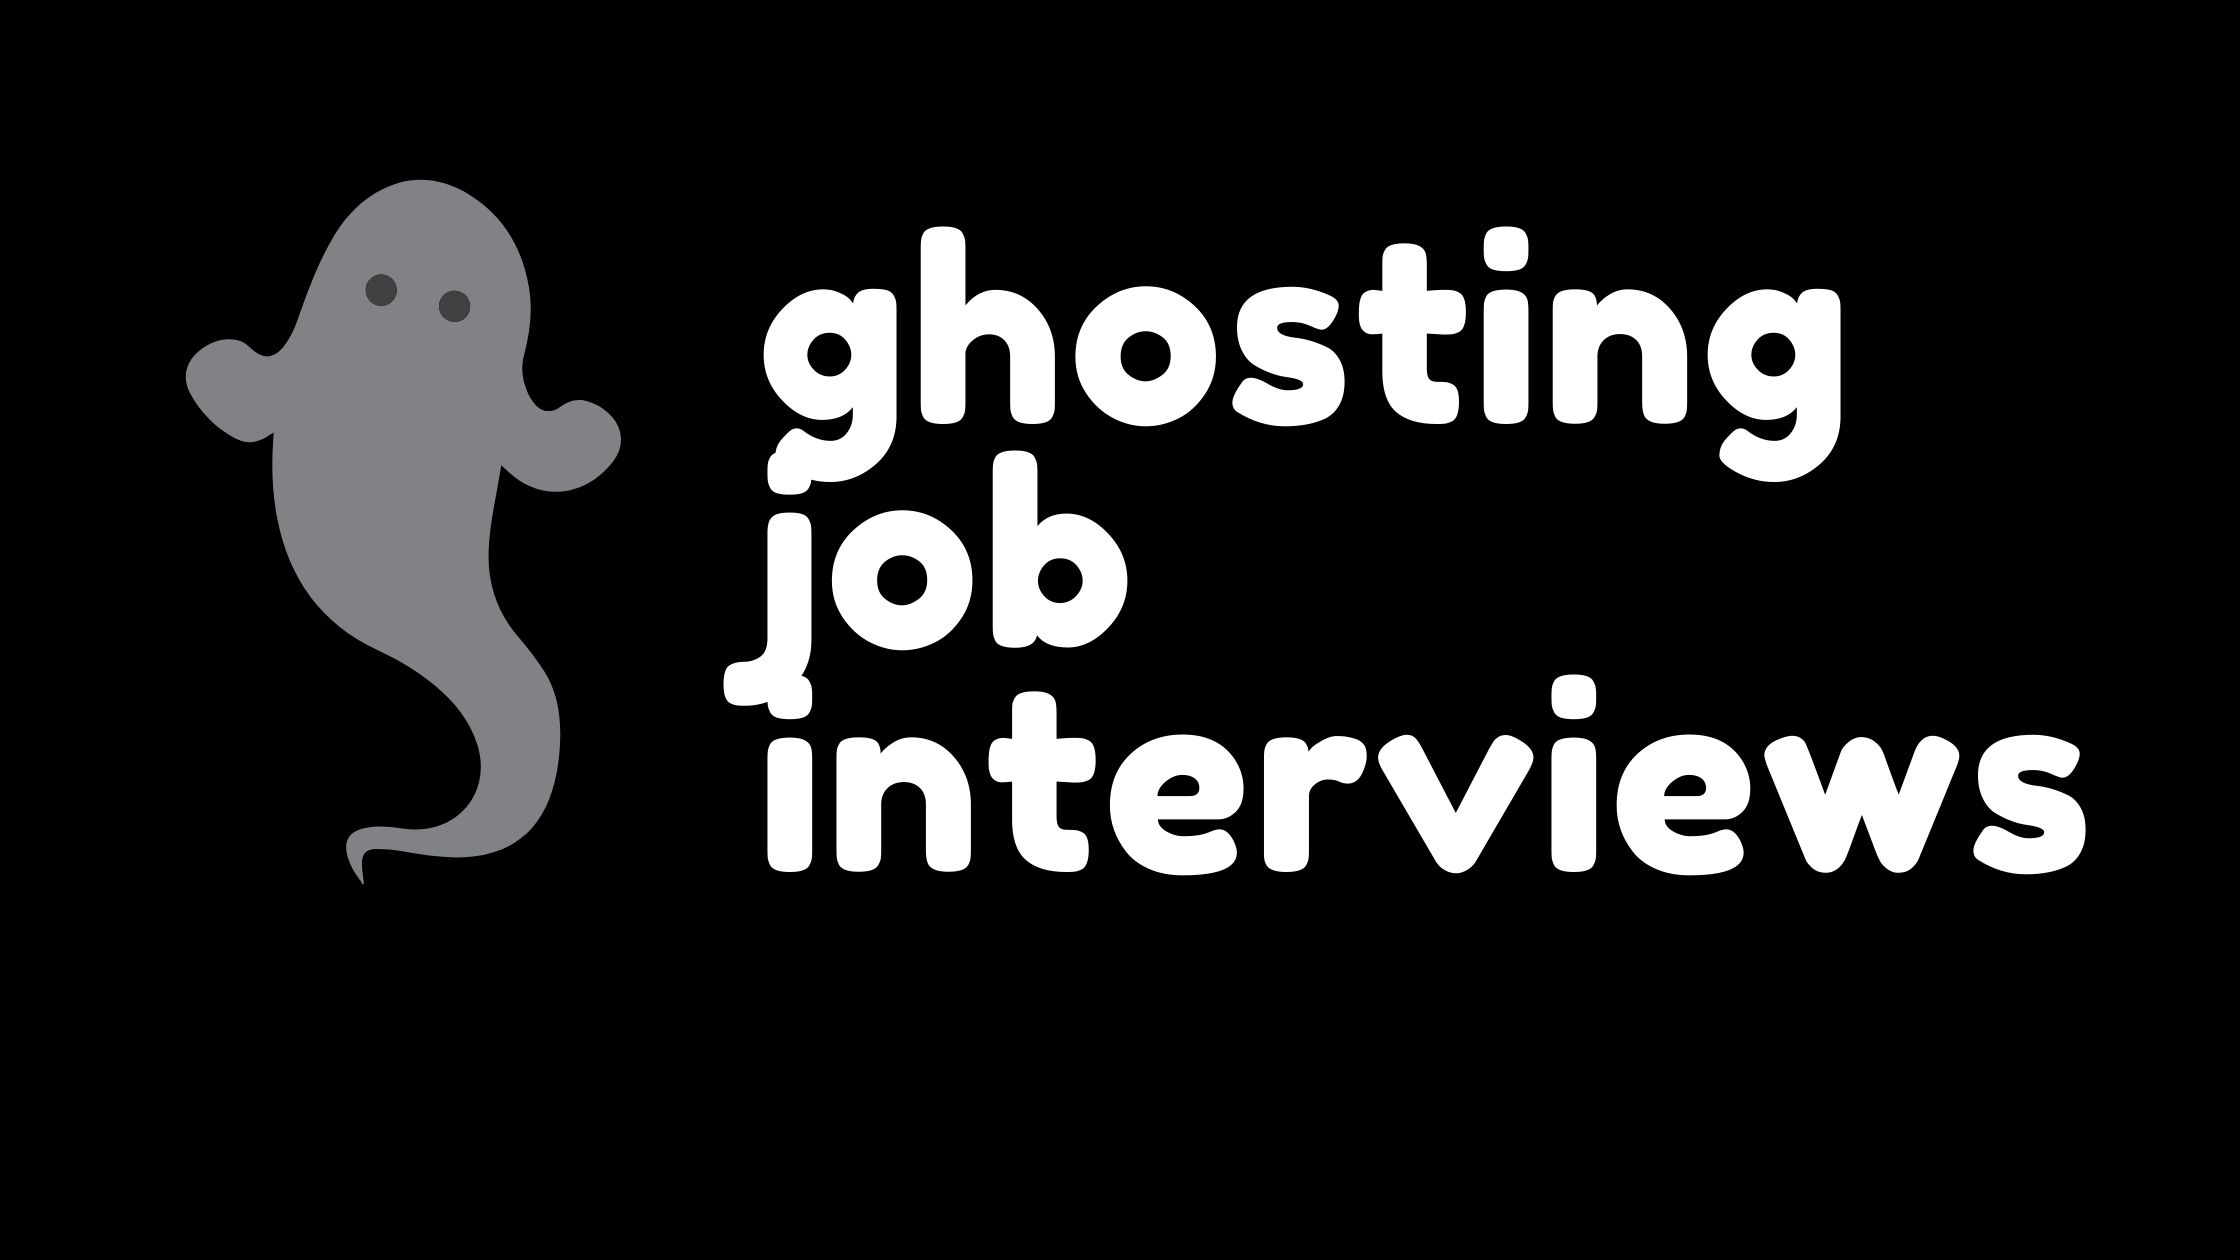 This is why people "Ghost" their programming interviews